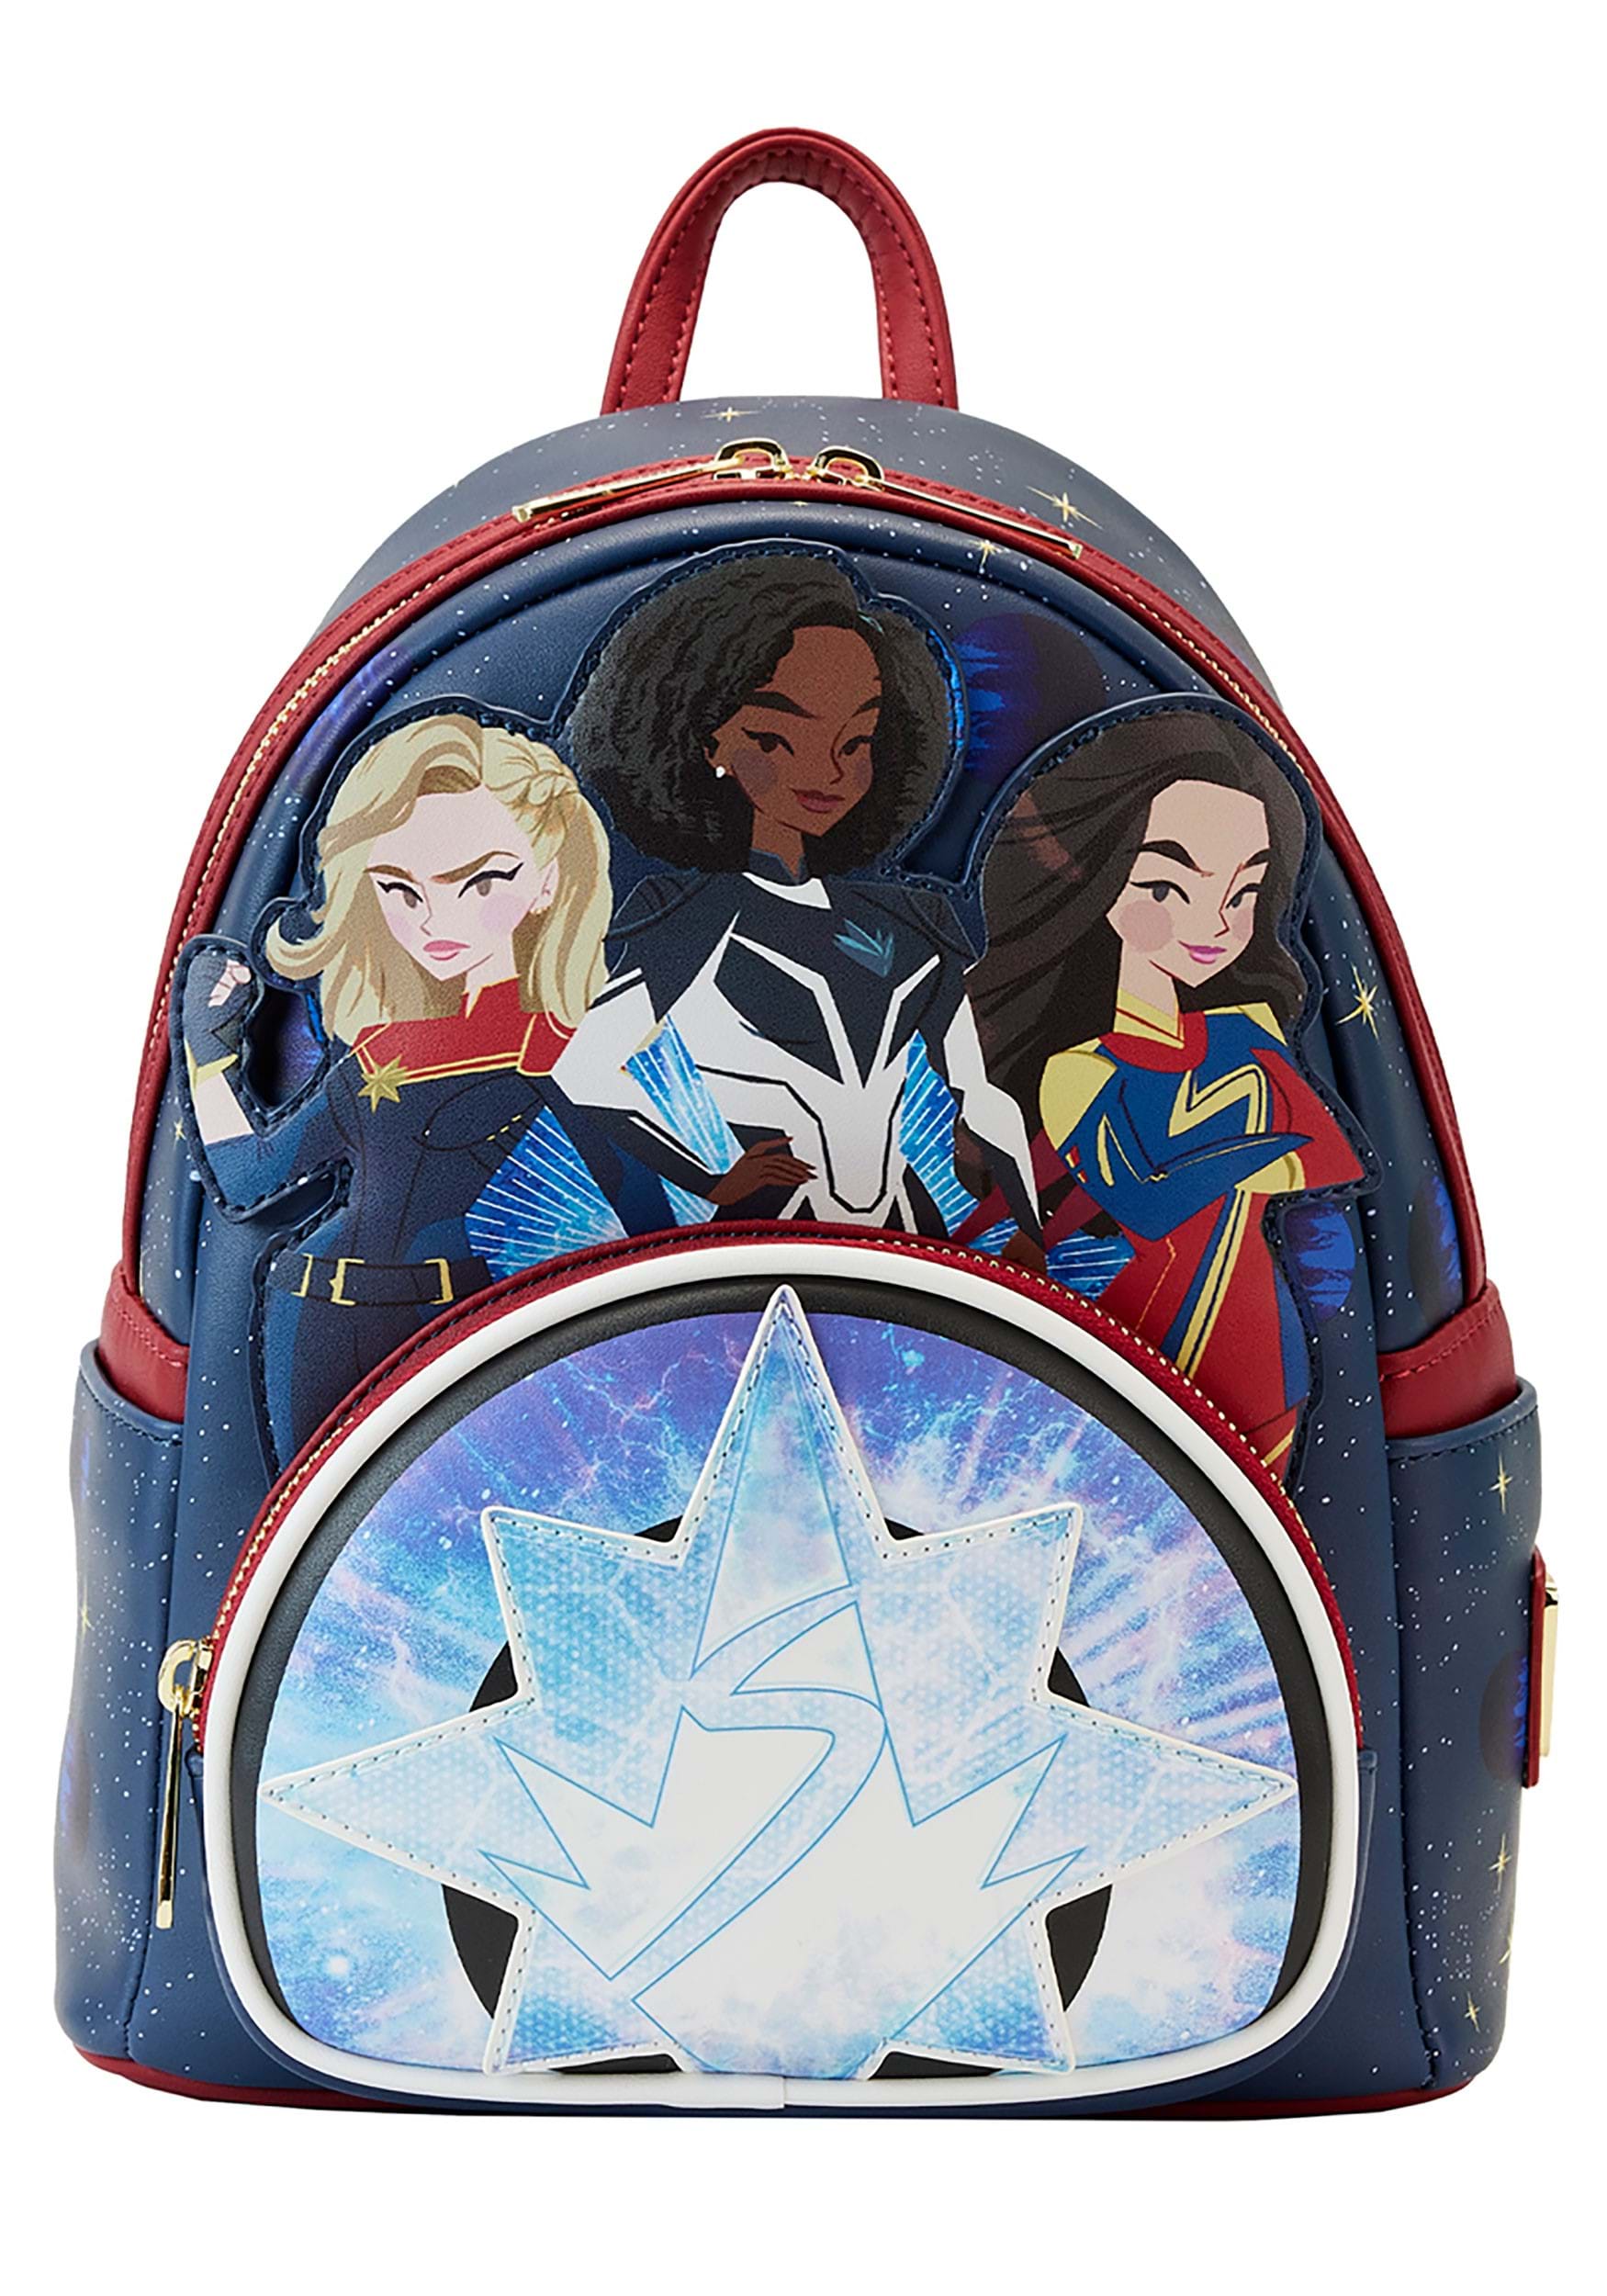 Loungefly Marvel The Marvels Group Mini Backpack by Loungefly | Loungefly Marvel